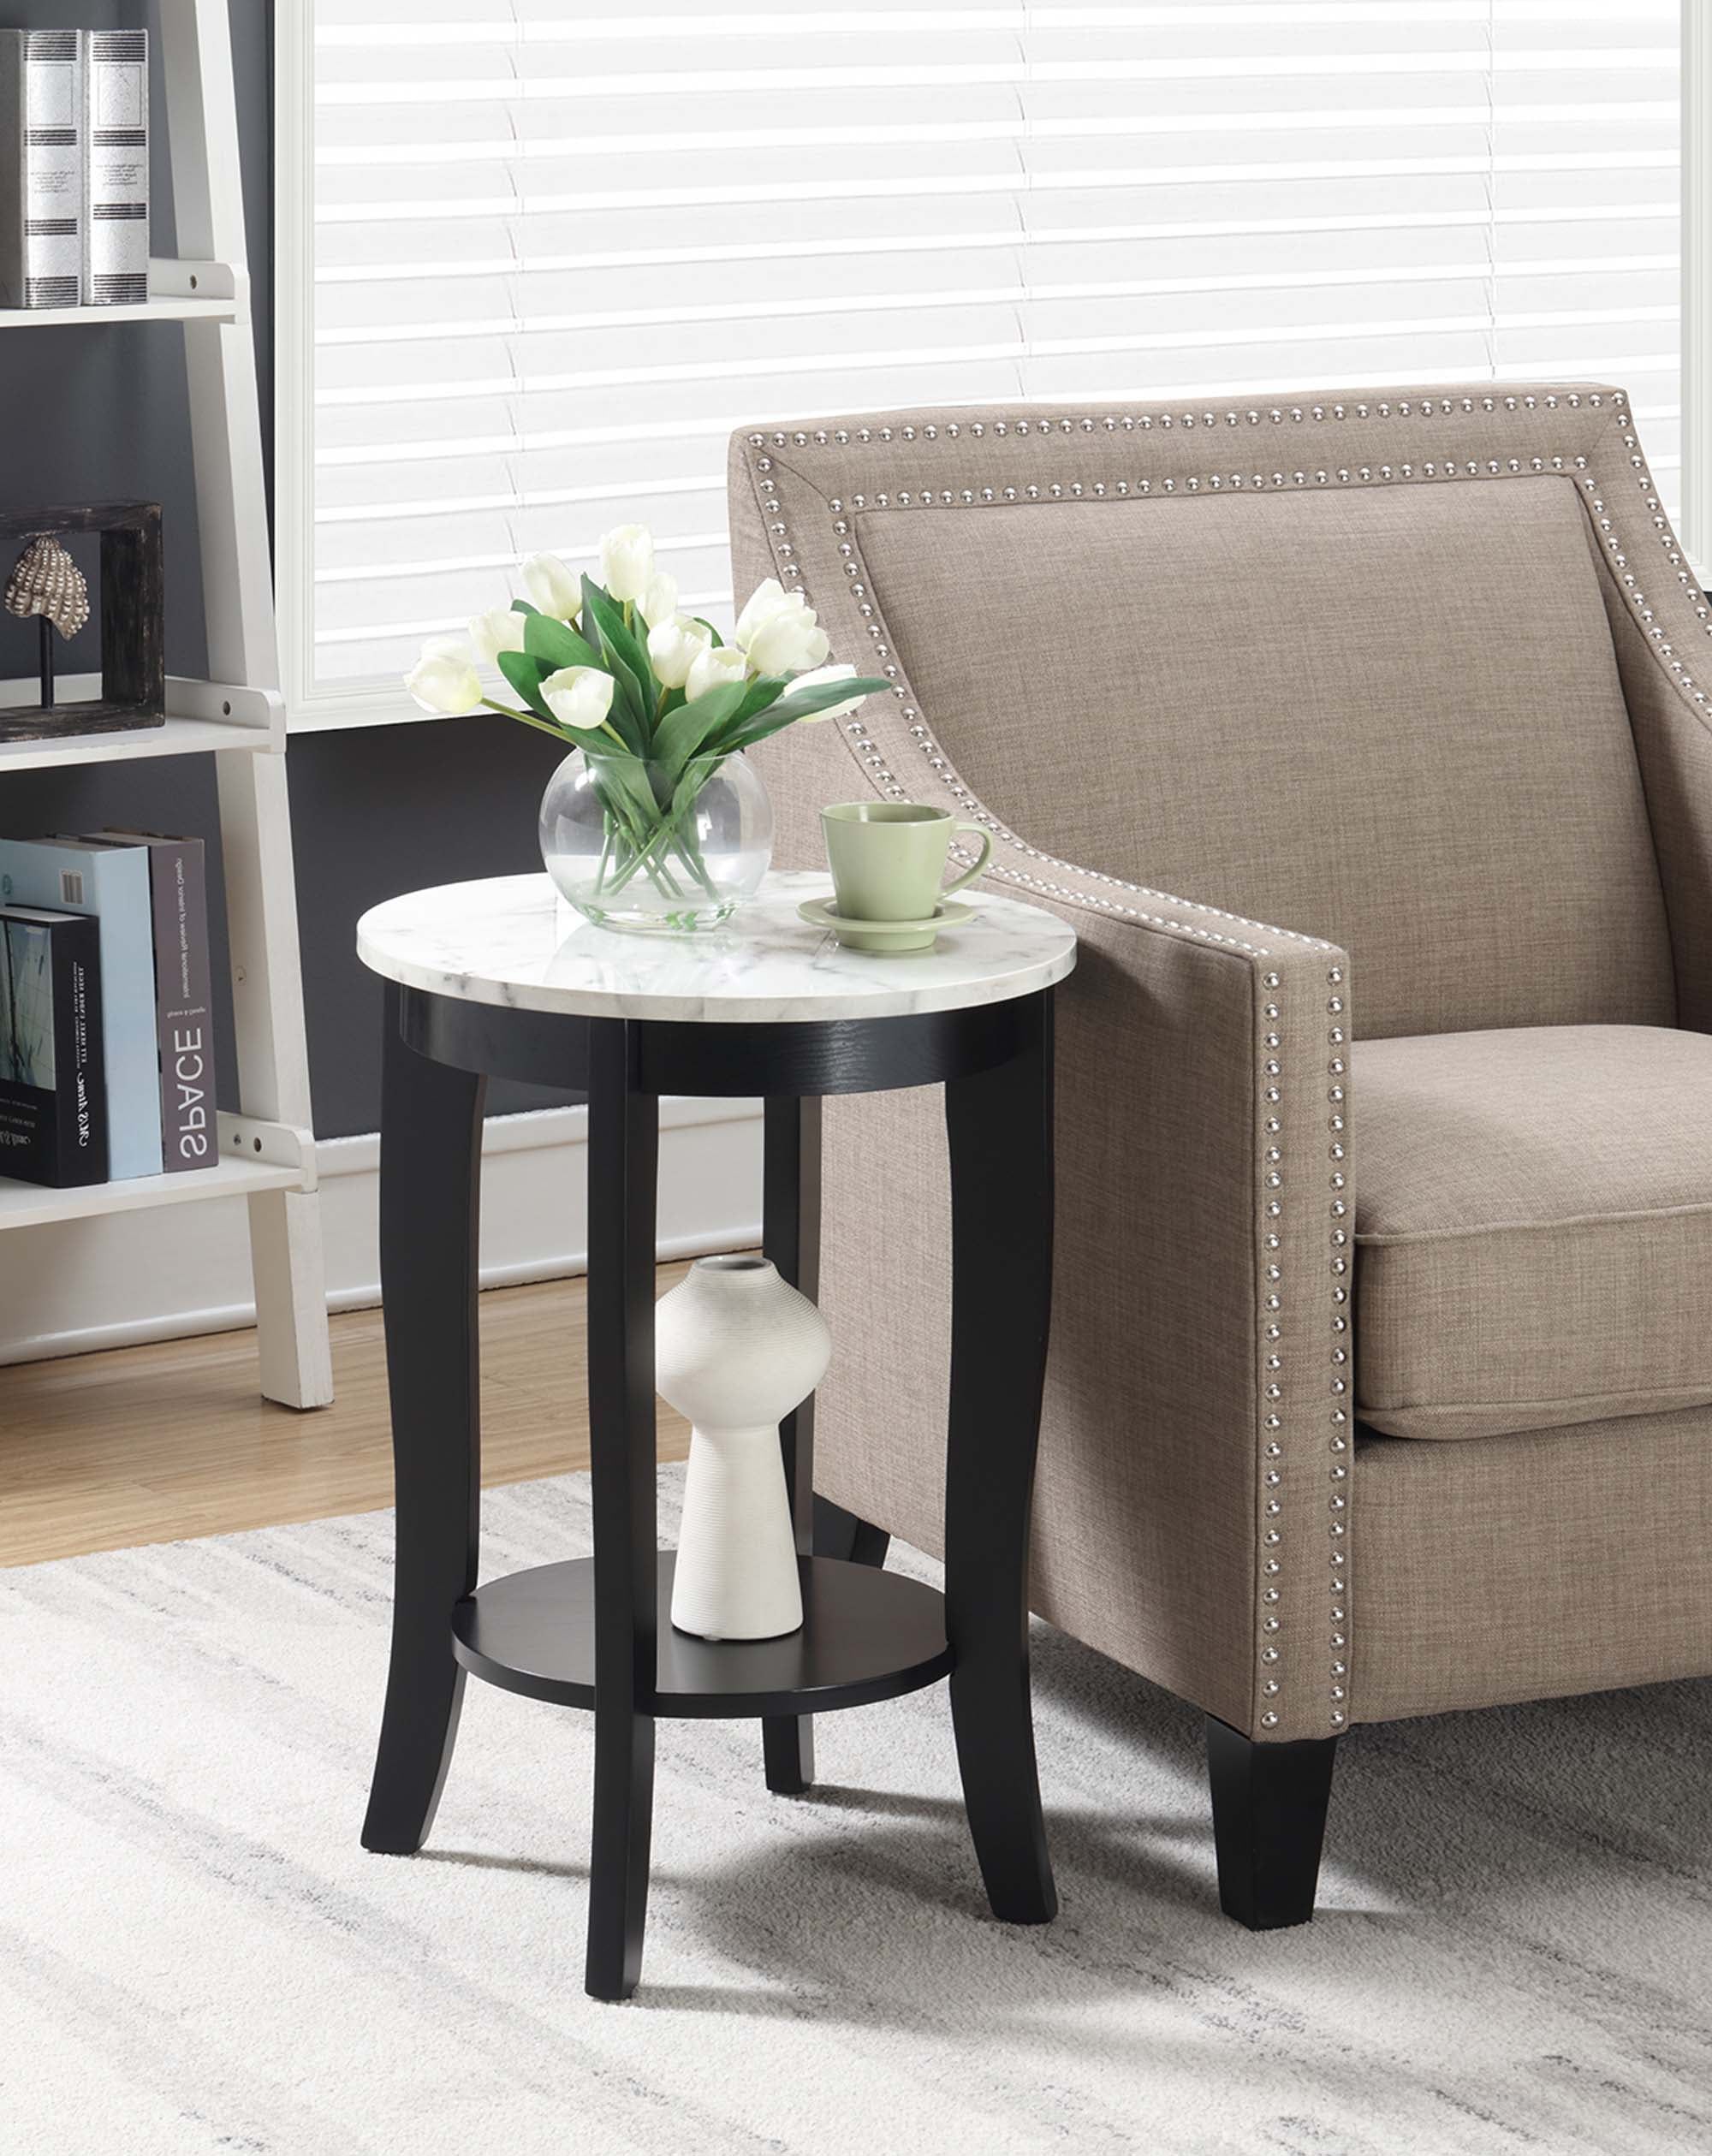 American Heritage Round Coffee Tables With Well Known Convenience Concepts American Heritage Round End Table, Multiple (View 11 of 15)